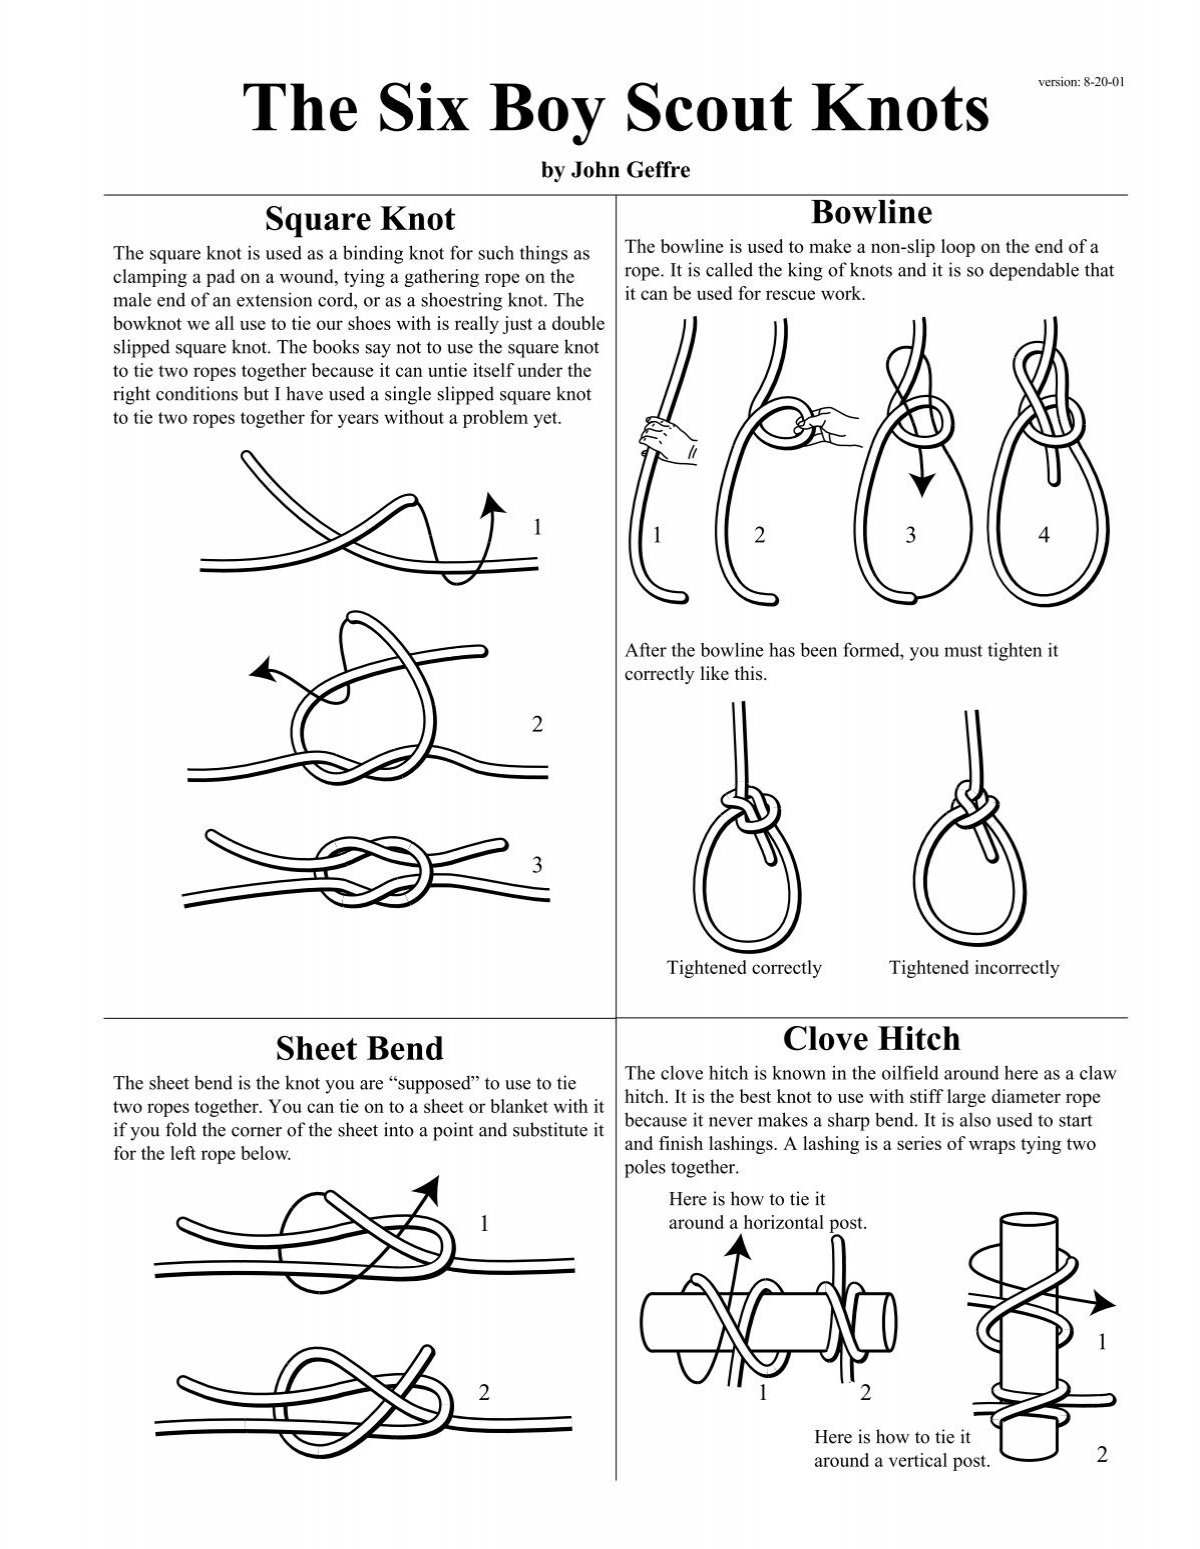 The Six Boy Scout Knots - MeritBadge.org